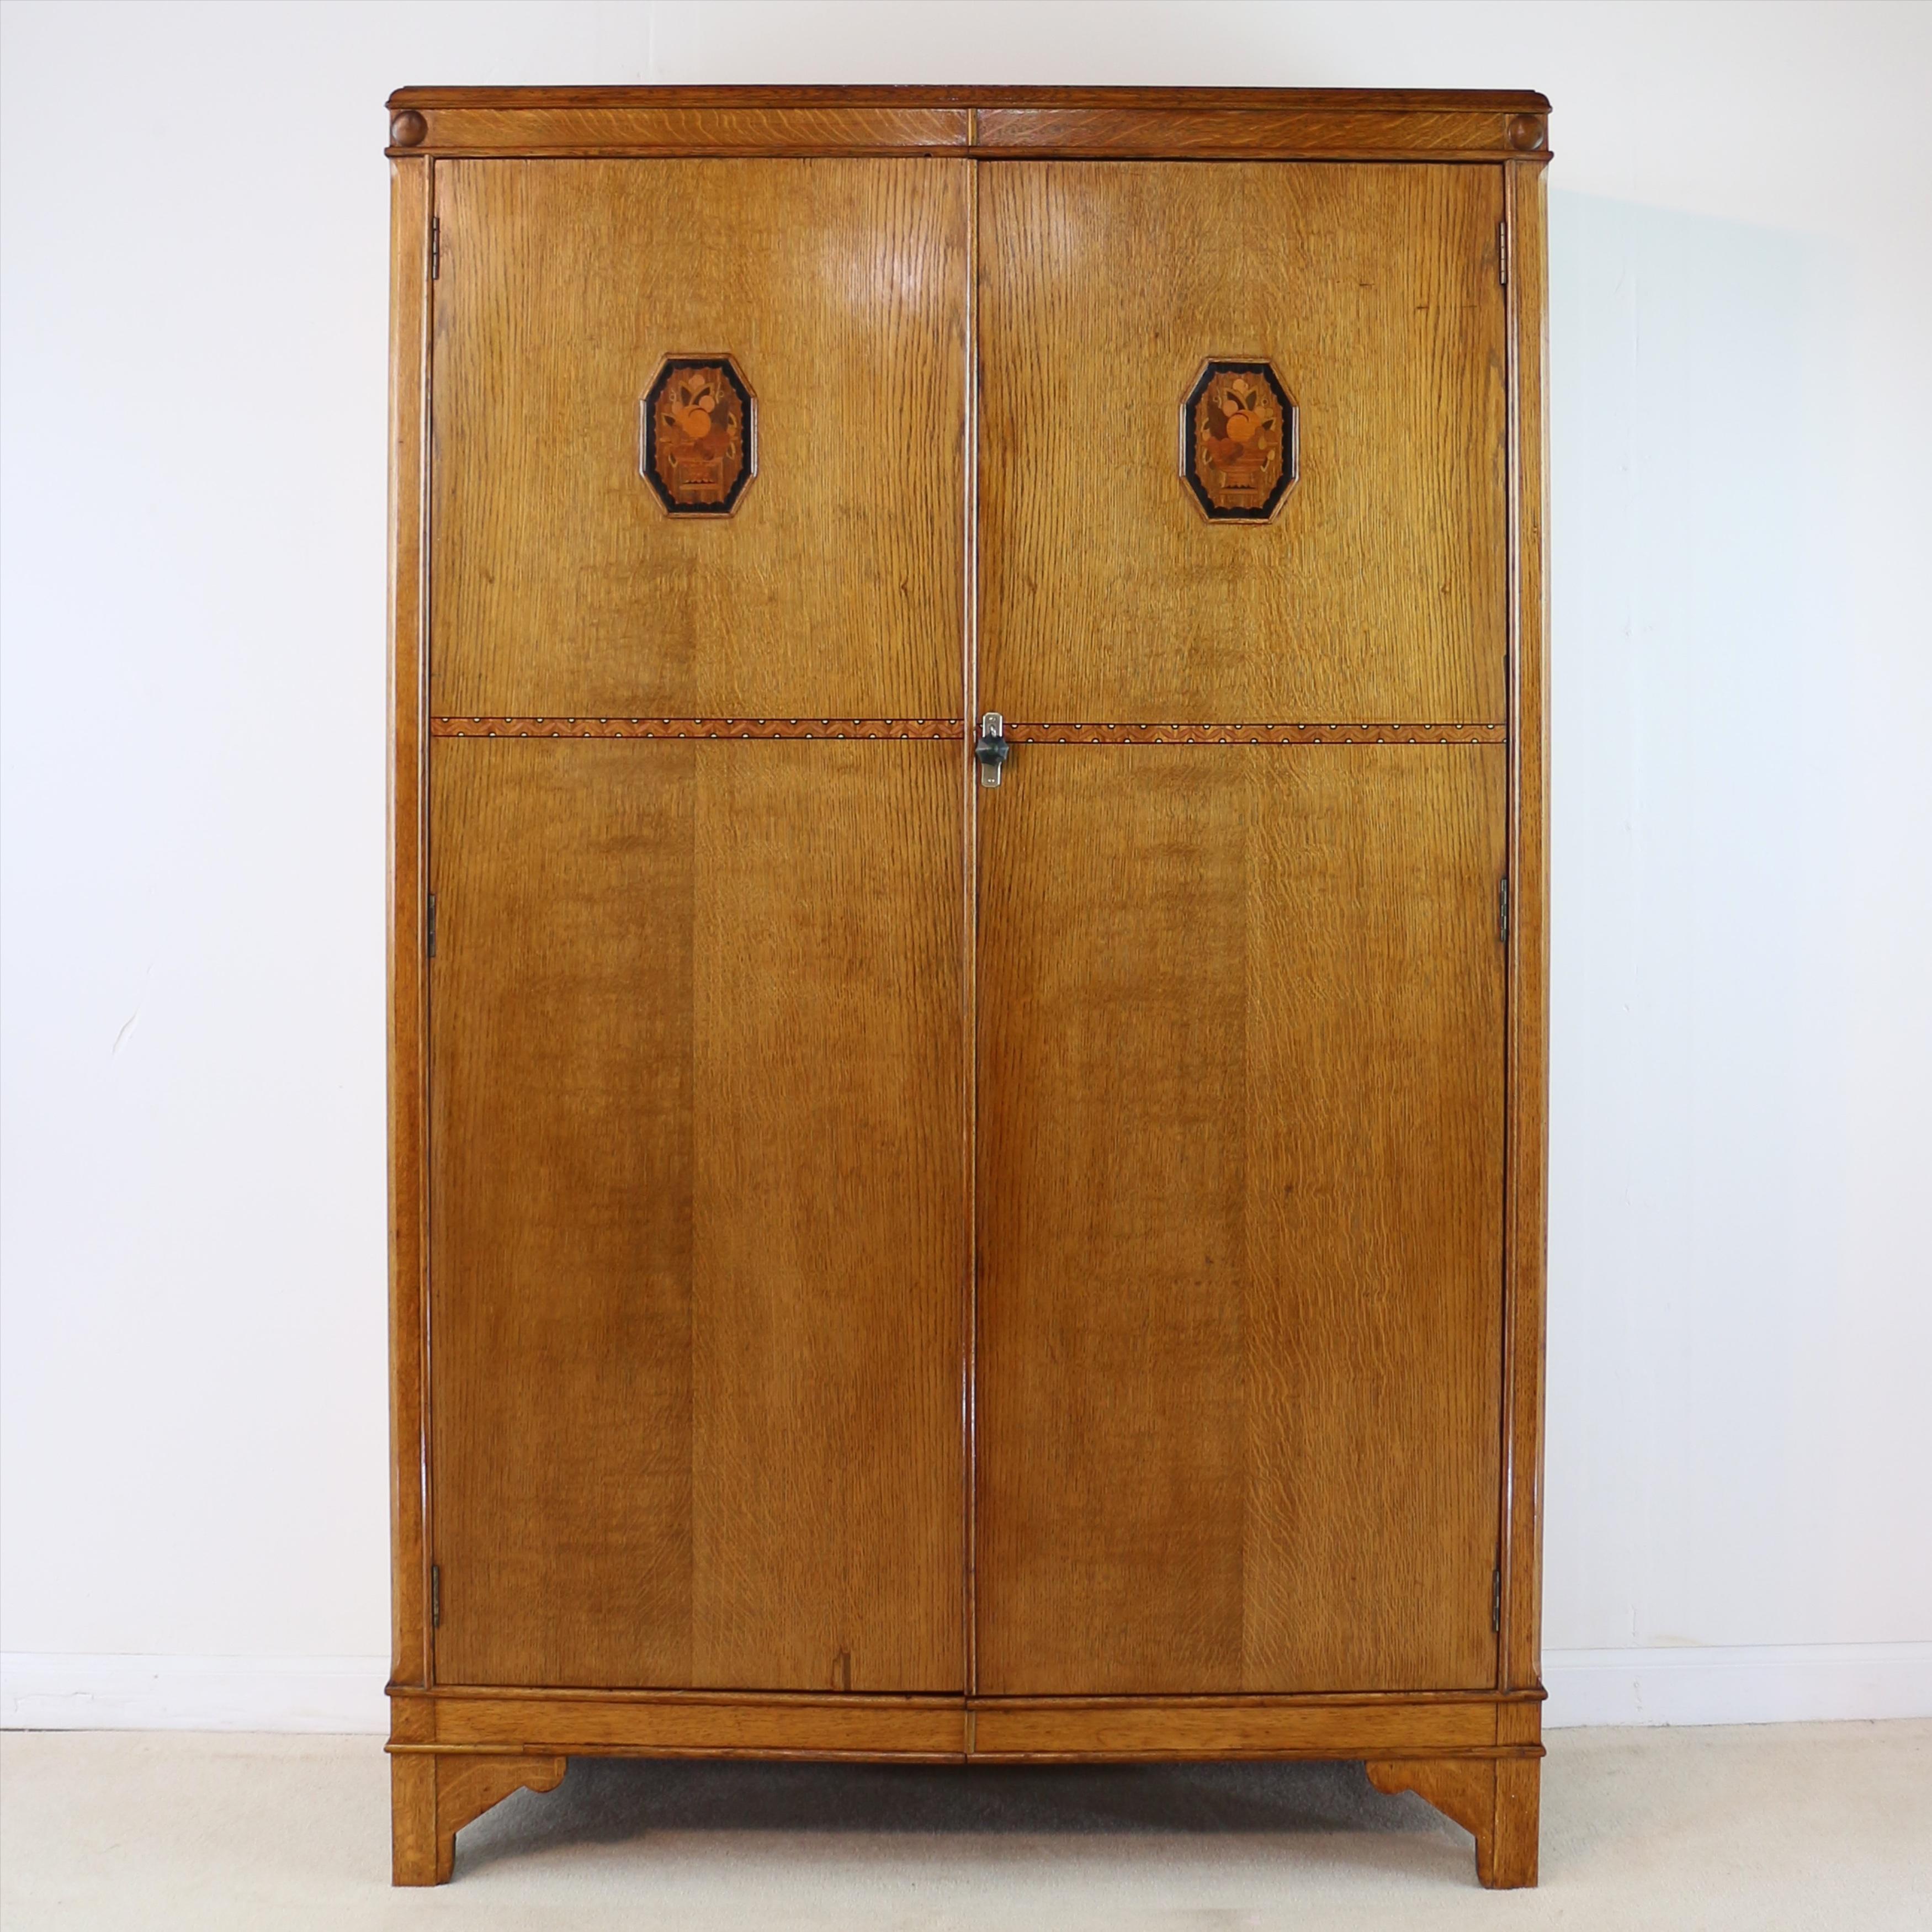 A super three piece Art Deco quarter-sawn oak & marquetry bedroom suite attributed to ‘Gaylayde’ by B Cohen & Sons of London. Dating to c.1930 and of super quality it features intricate geometric inlaid bandings in mahogany, satinwood, ebony and